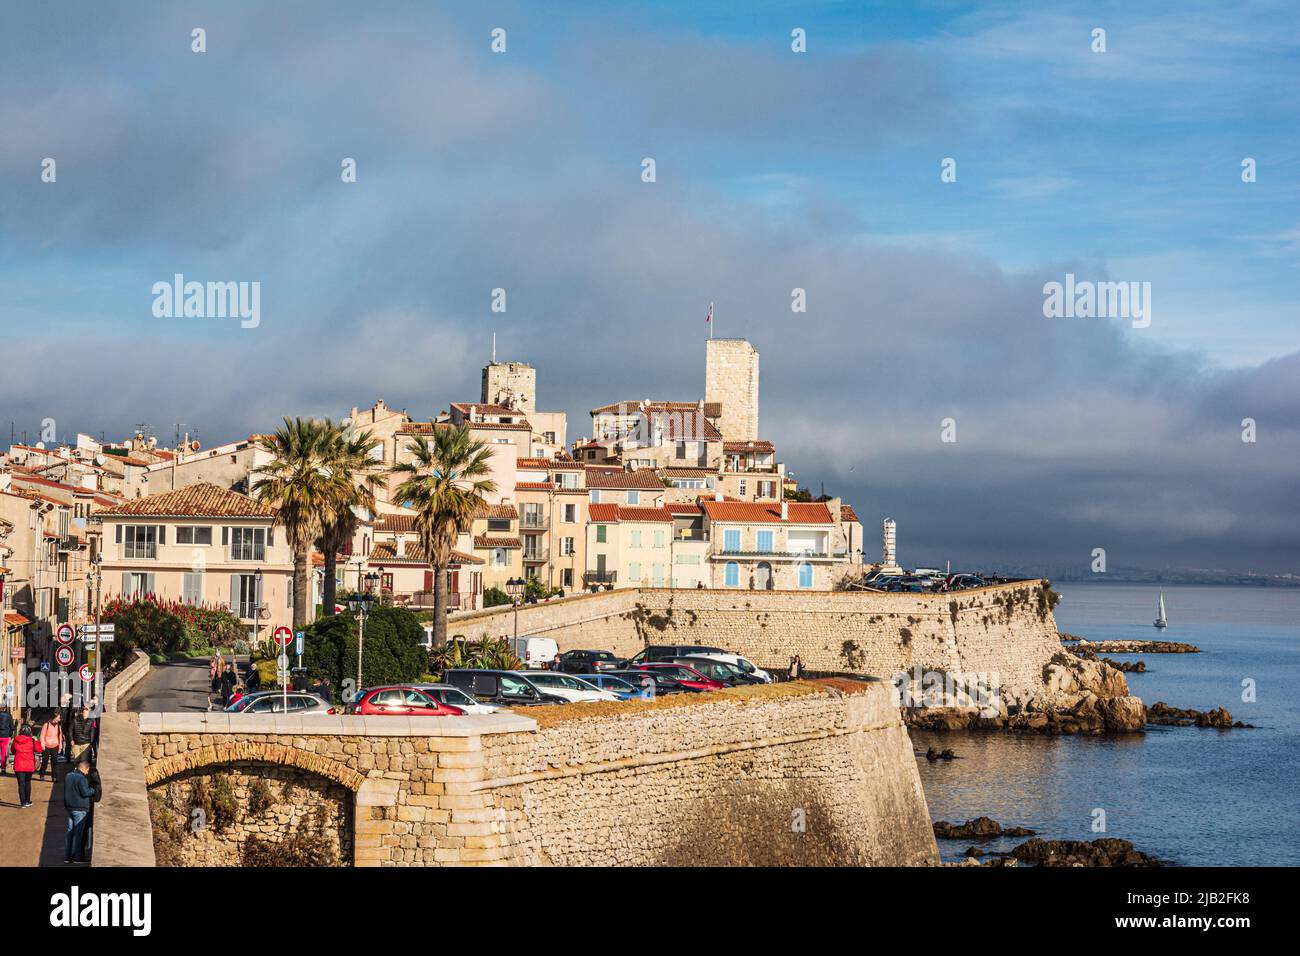 View of historic old town, Antibes, French Riviera, France Stock Photo